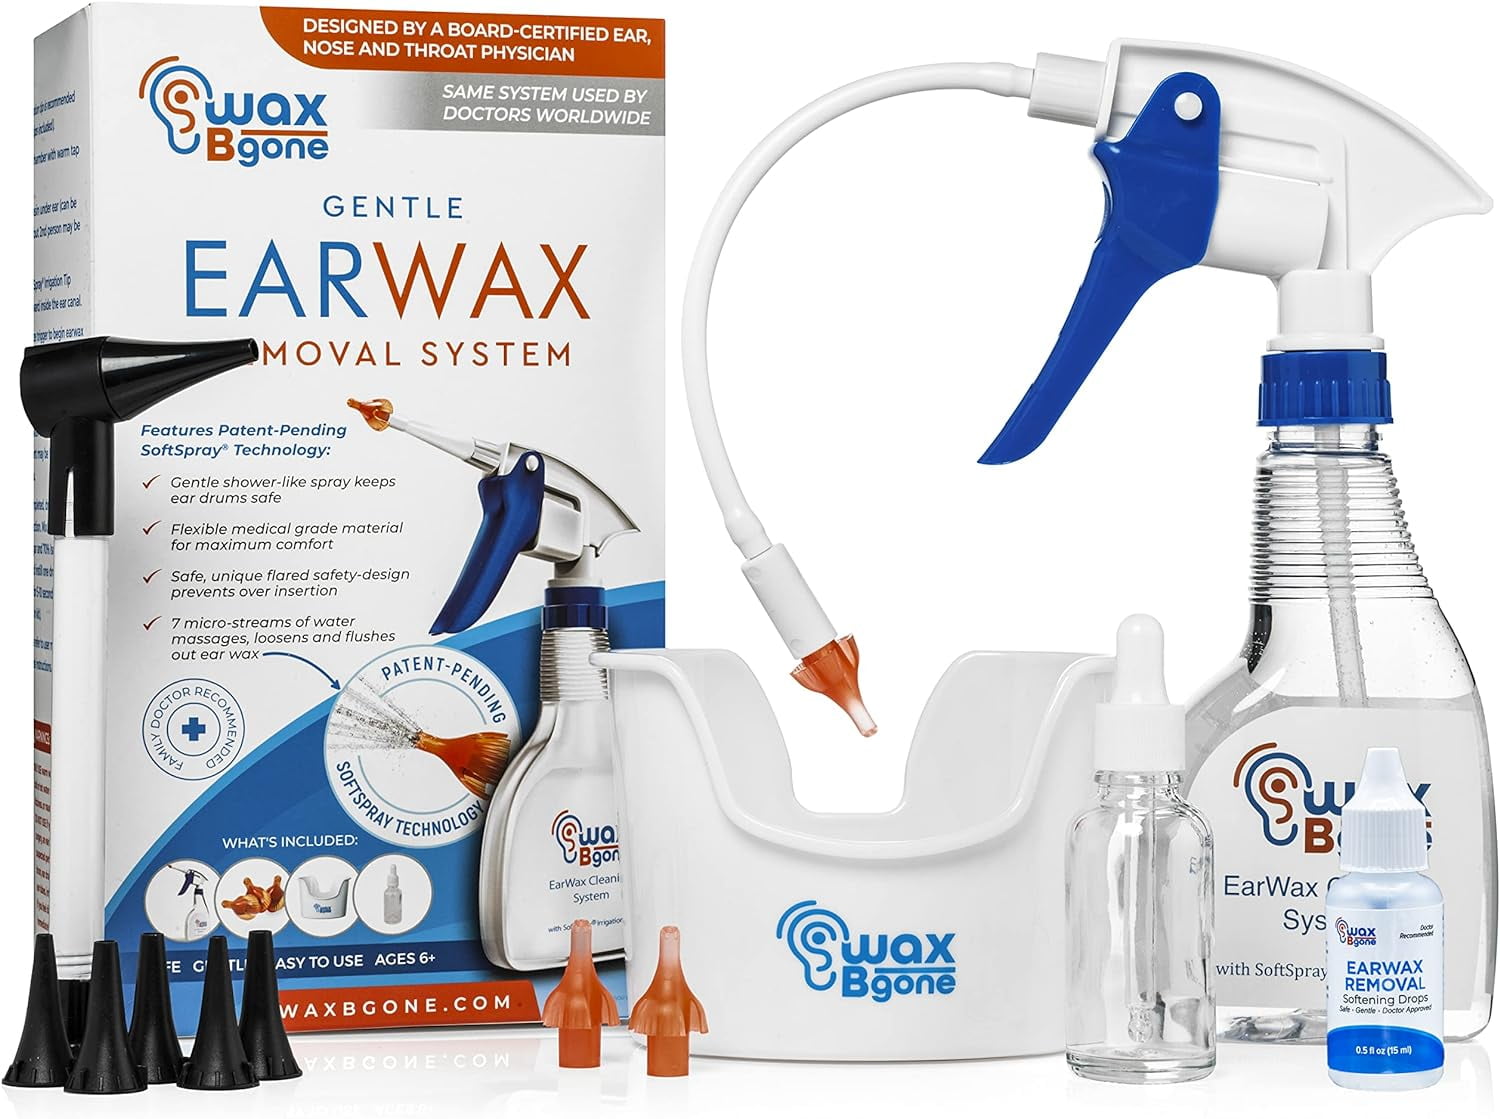 Tech-Care Ear Wax Removal Aid Kit - Vaughn Engineering